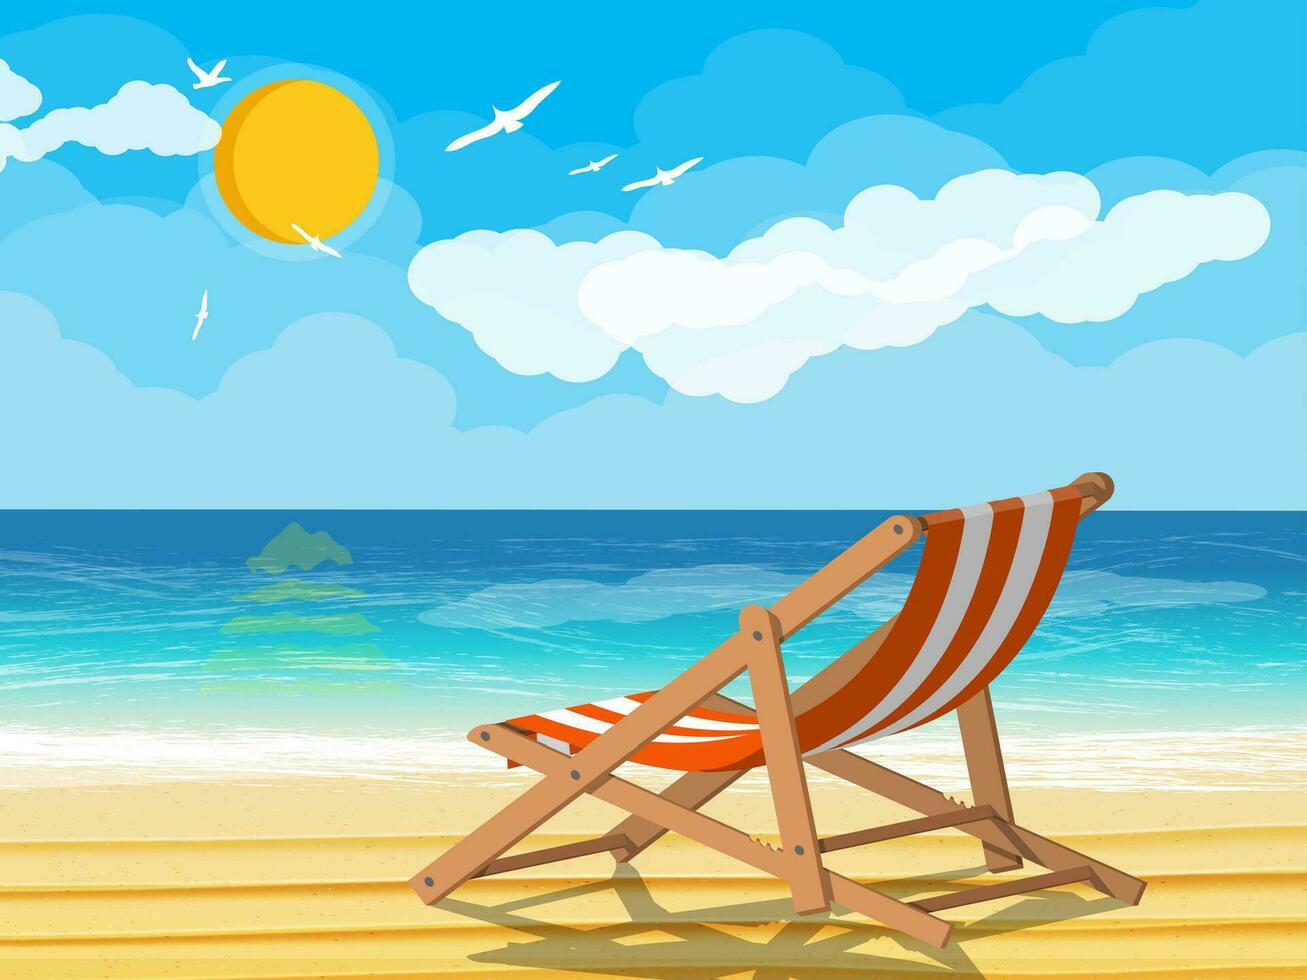 Landscape of wooden chaise lounge on beach. Seaguls in sky. Sun with reflection in water and clouds. Day in tropical place. Vector illustration in flat style